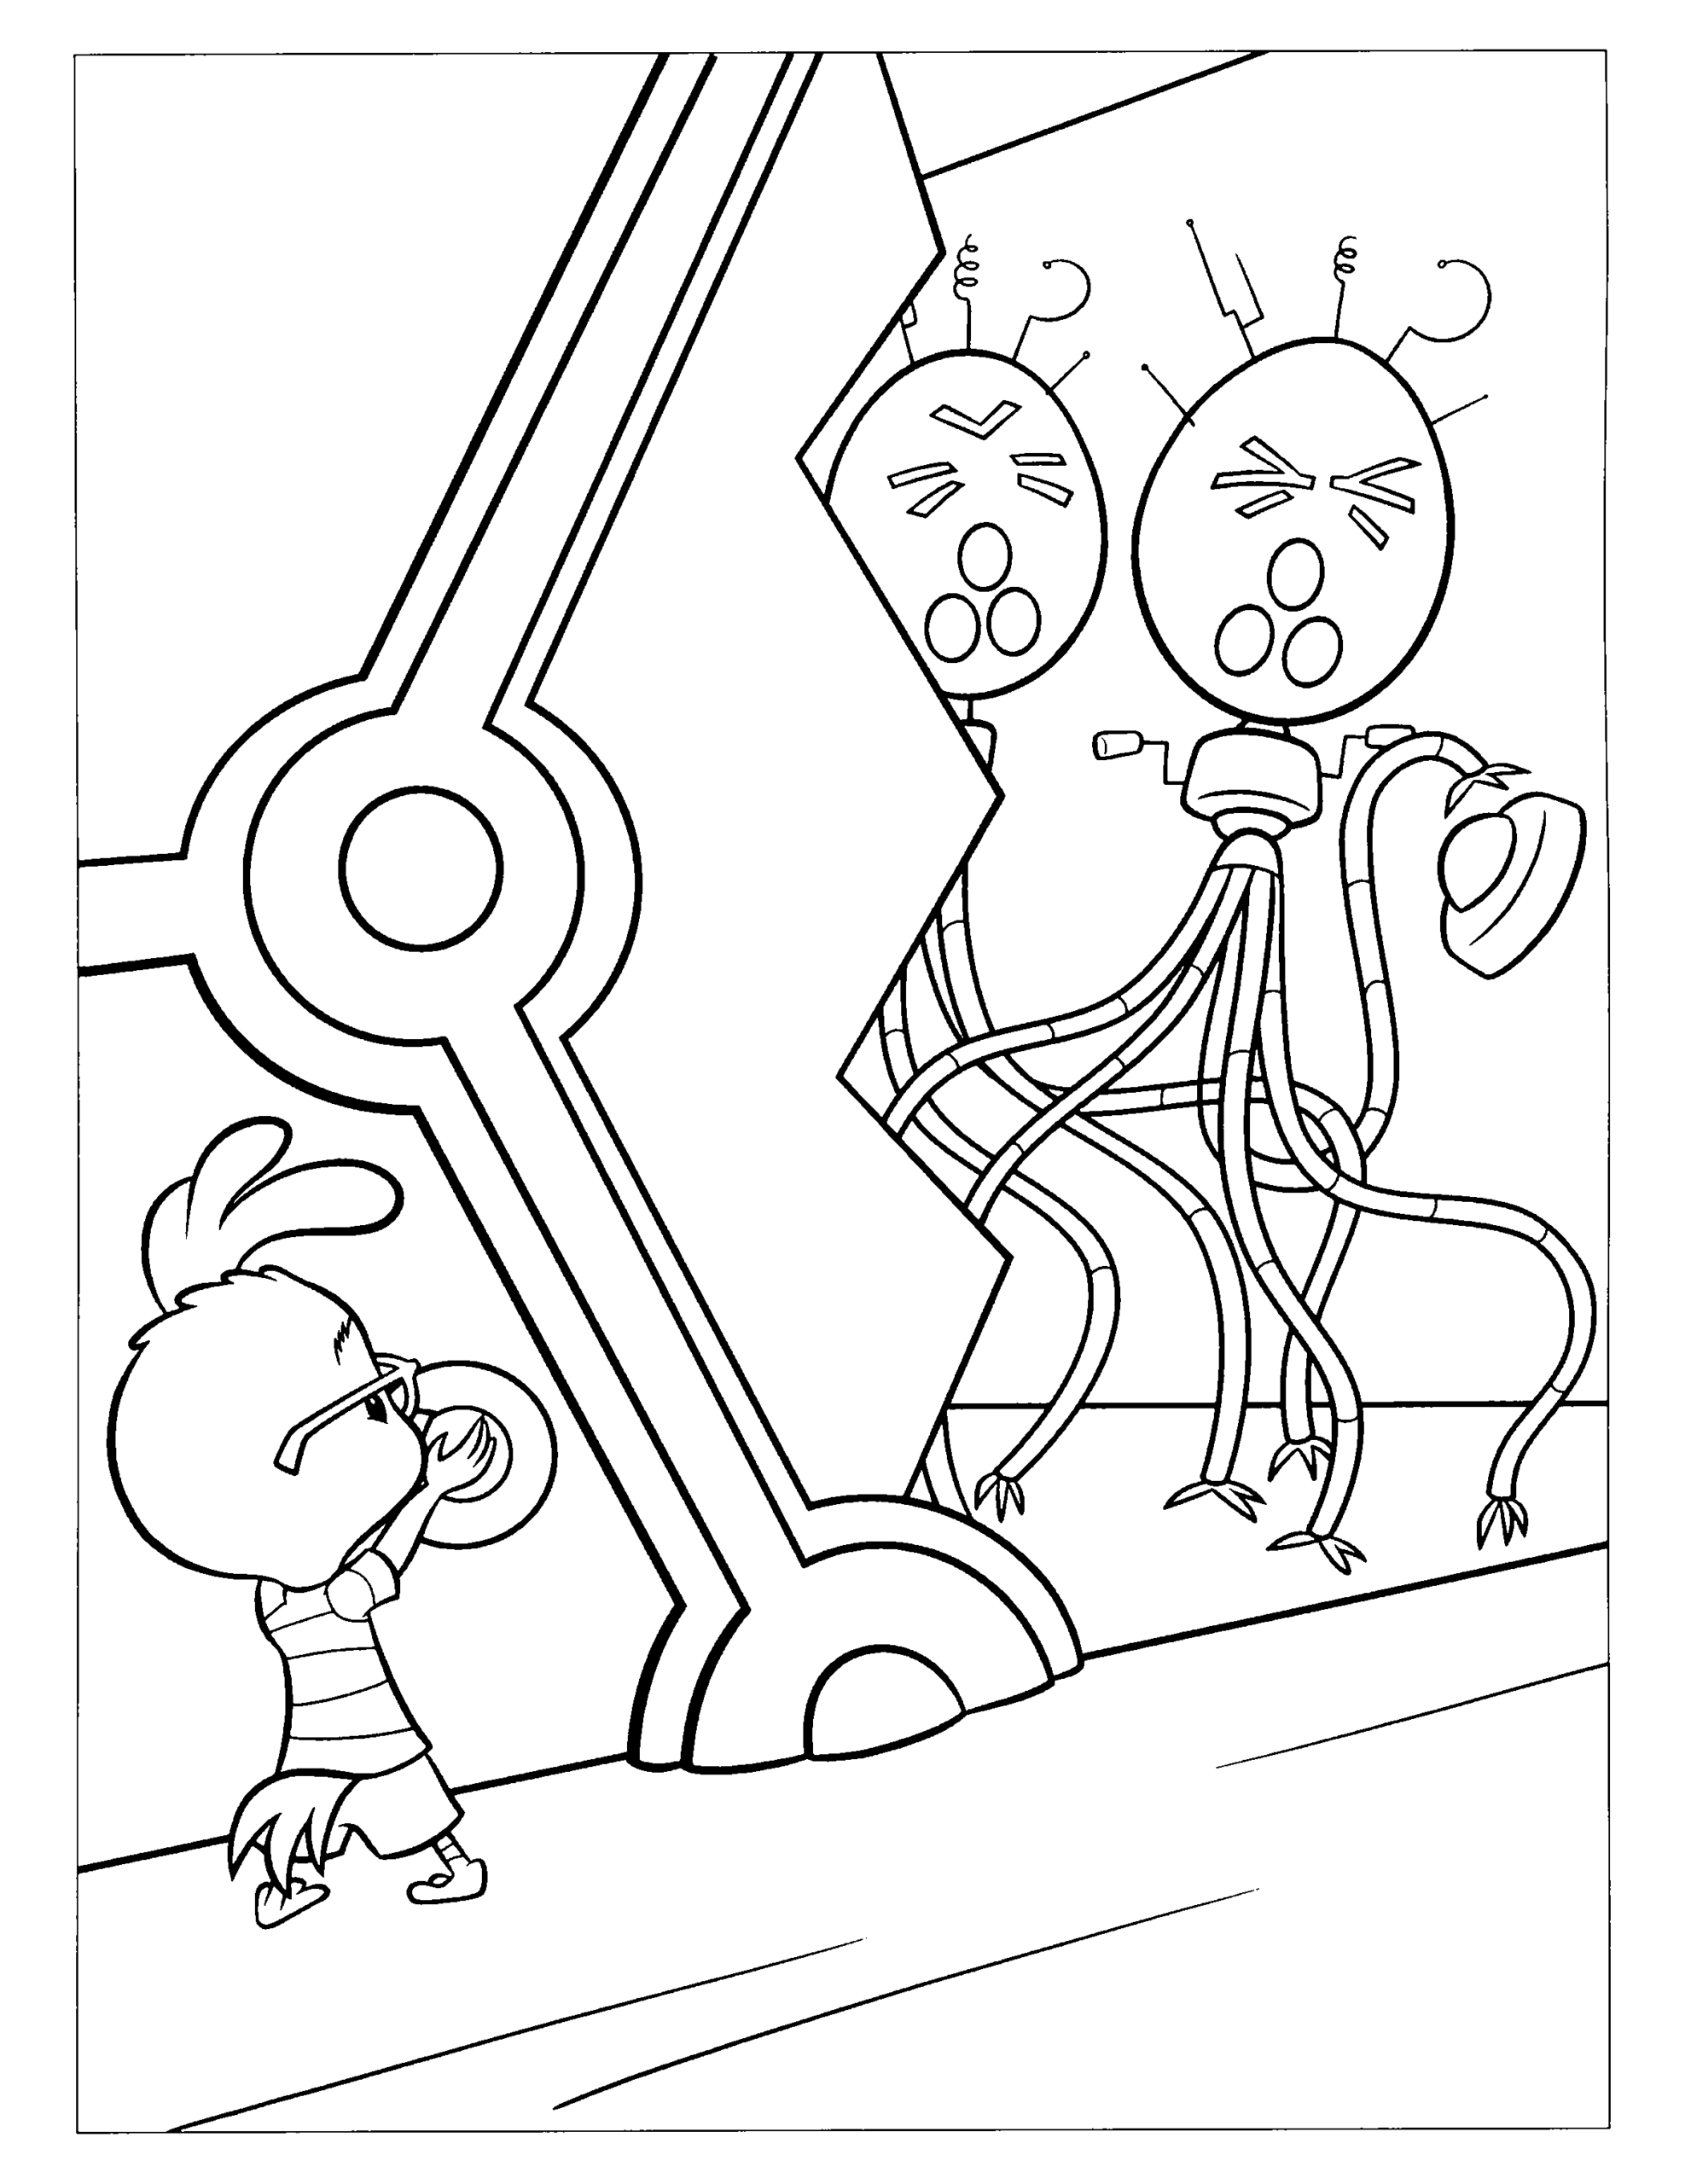 Chicken Little Coloring Pages TV Film chicken little 8 Printable 2020 02095 Coloring4free